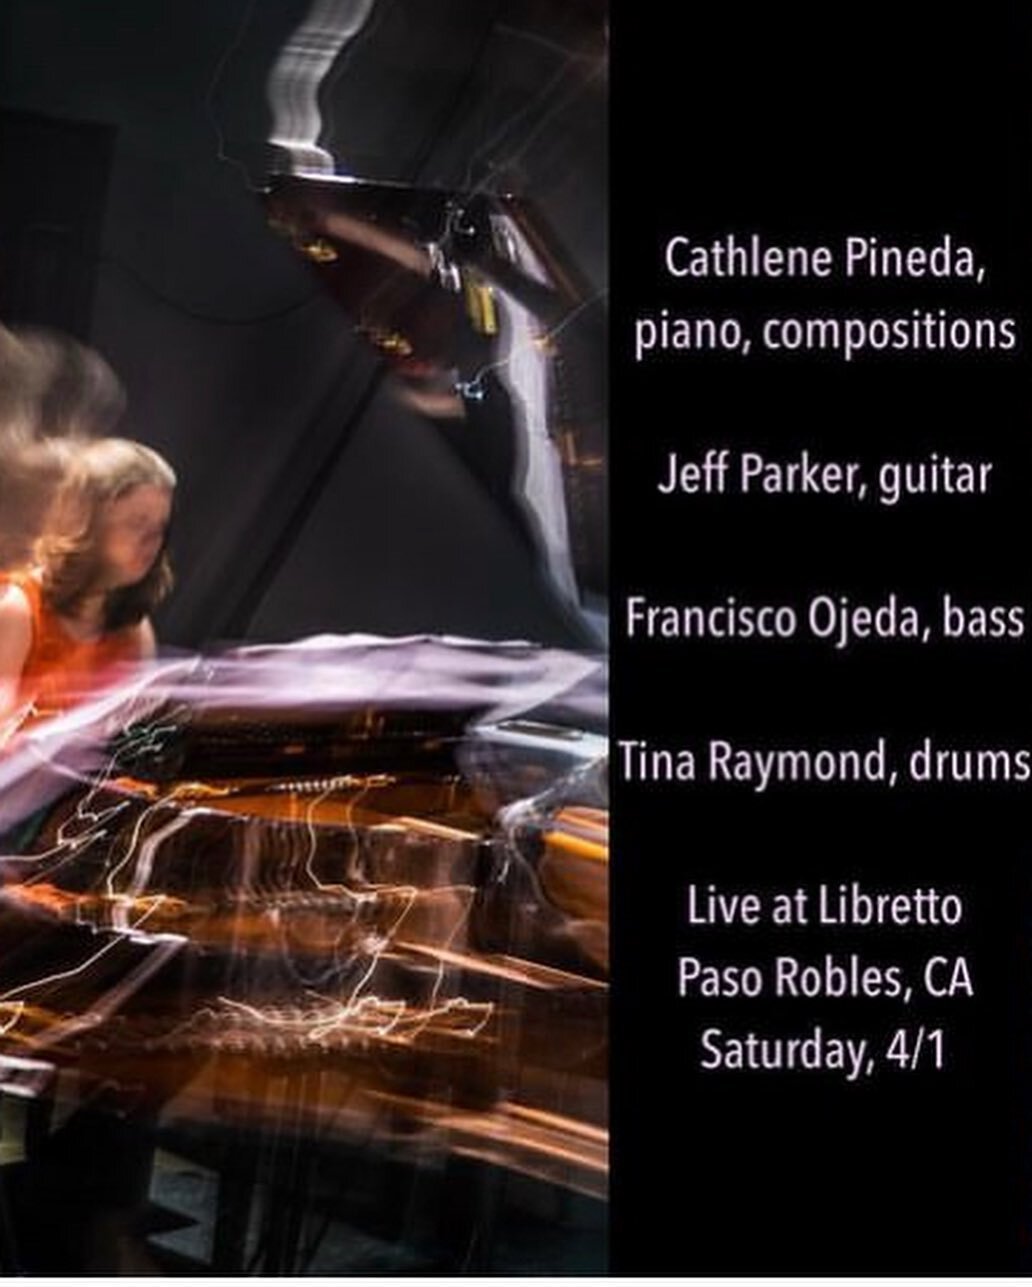 GigsGigsGigsGigsGigs! Some fun stuff coming up. Cathlene Pineda Quartet in Paso Robles on Saturday, ETA 4tet at ETA on Monday, with Lisa Alvarado and Joshua Abrams at Redcat on Thursday, and a solo show/sharing the bill with Caroline Davis in Brookly